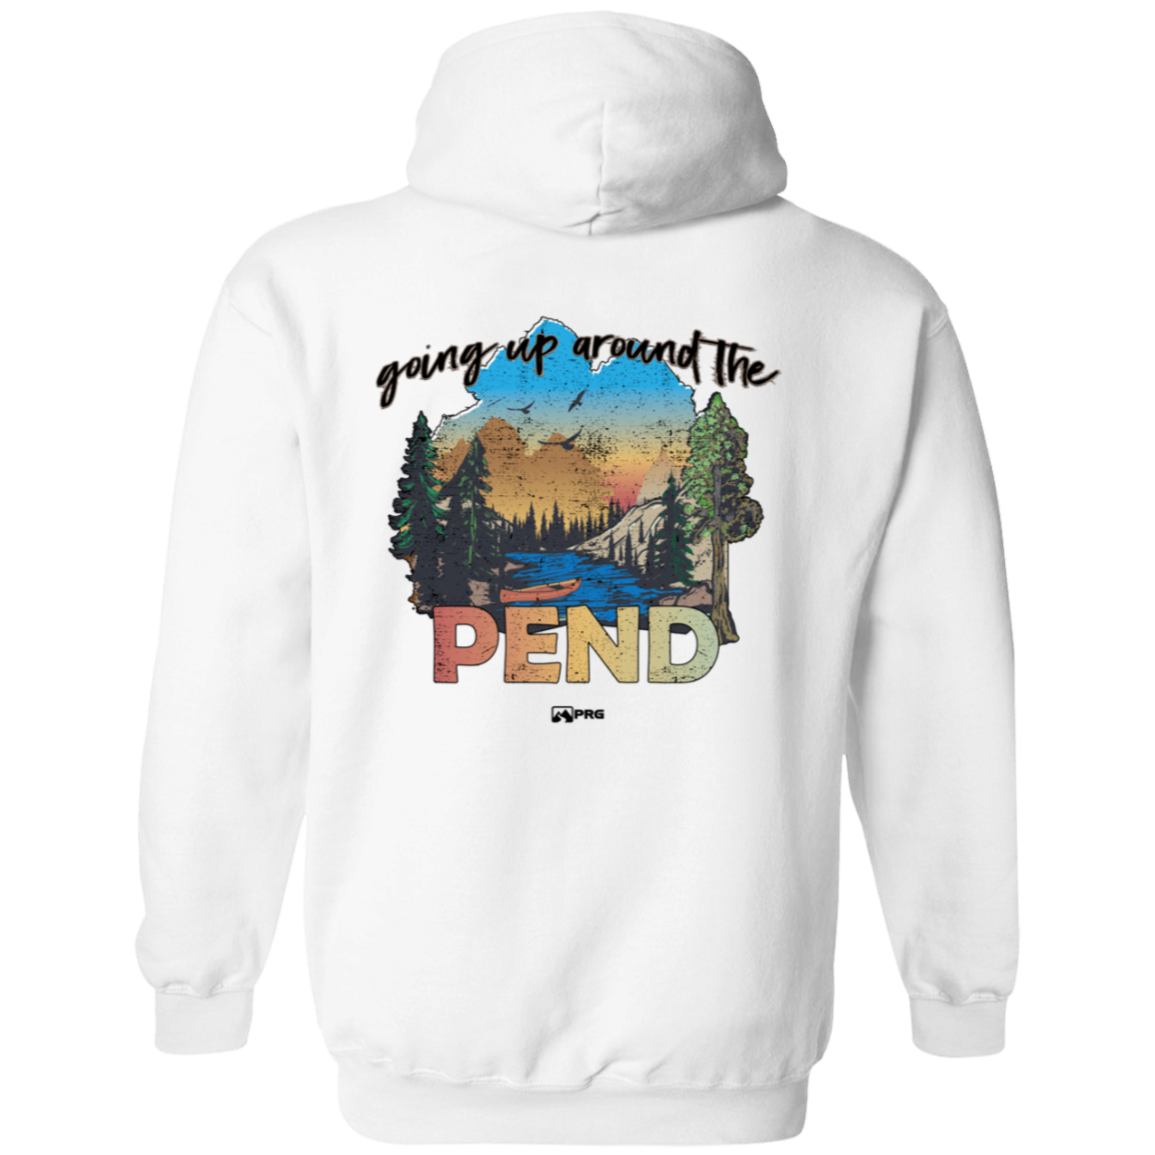 Around the Pend (Front & Back) - Hoodie